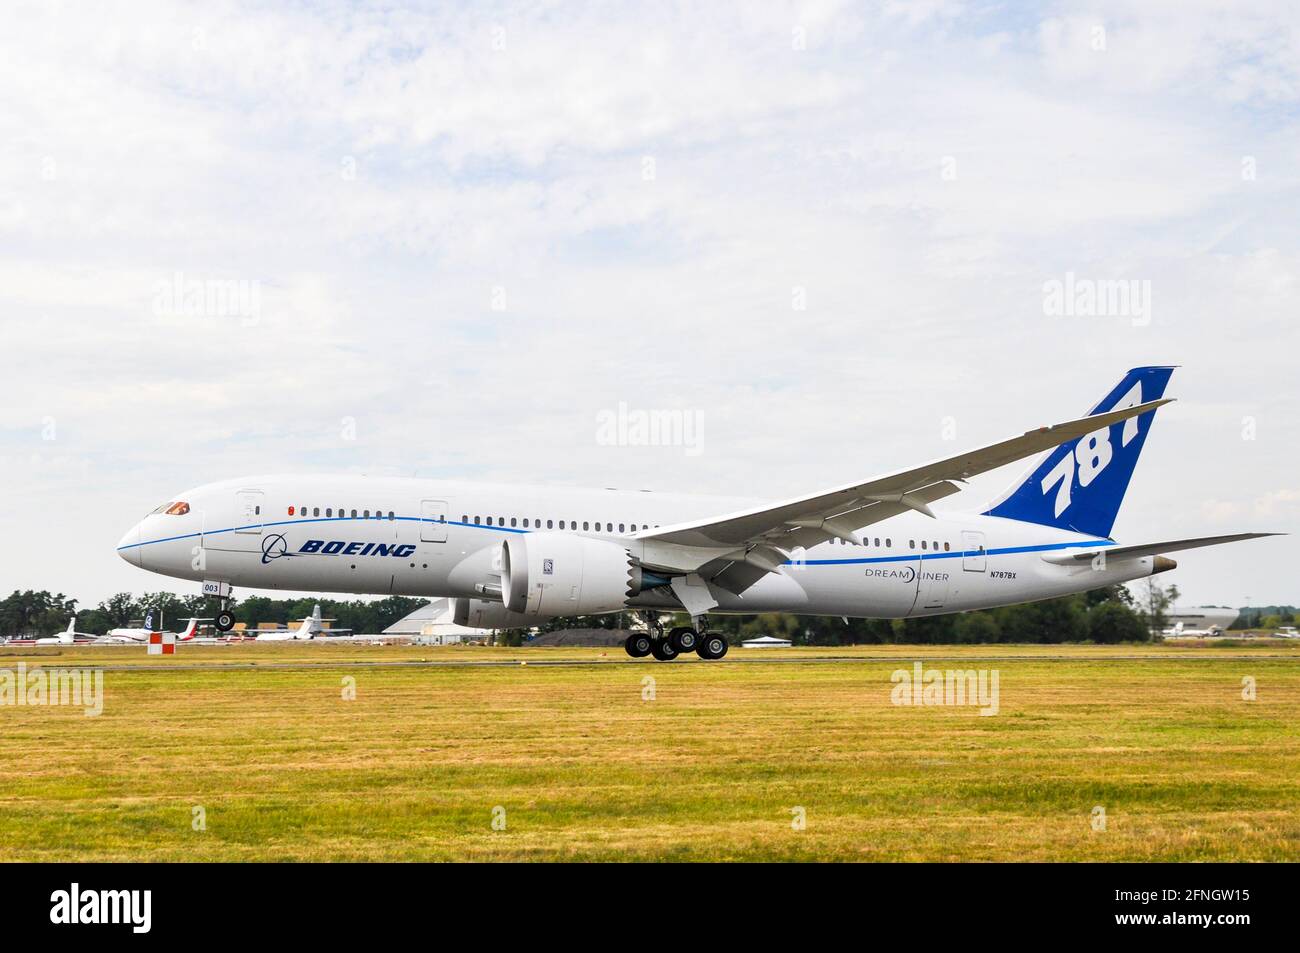 Prototype demonstrator Boeing 787 Dreamliner jet plane in corporate scheme, taking off to fly its debut appearance at the Farnborough Airshow 2010 Stock Photo